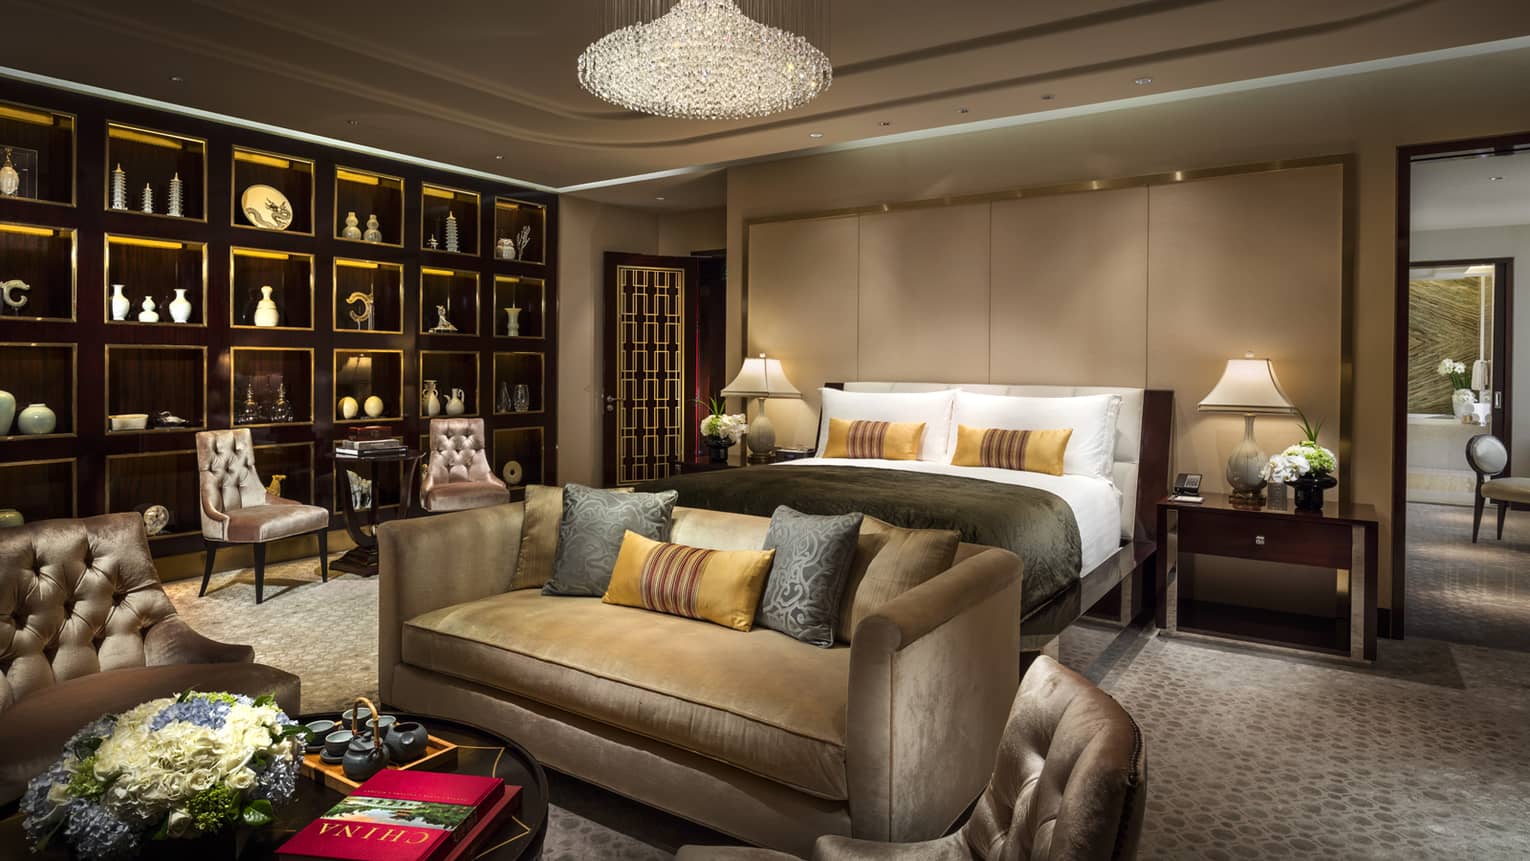 The Imperial Suite’s opulent bedroom, including a full living area and a wall of art works